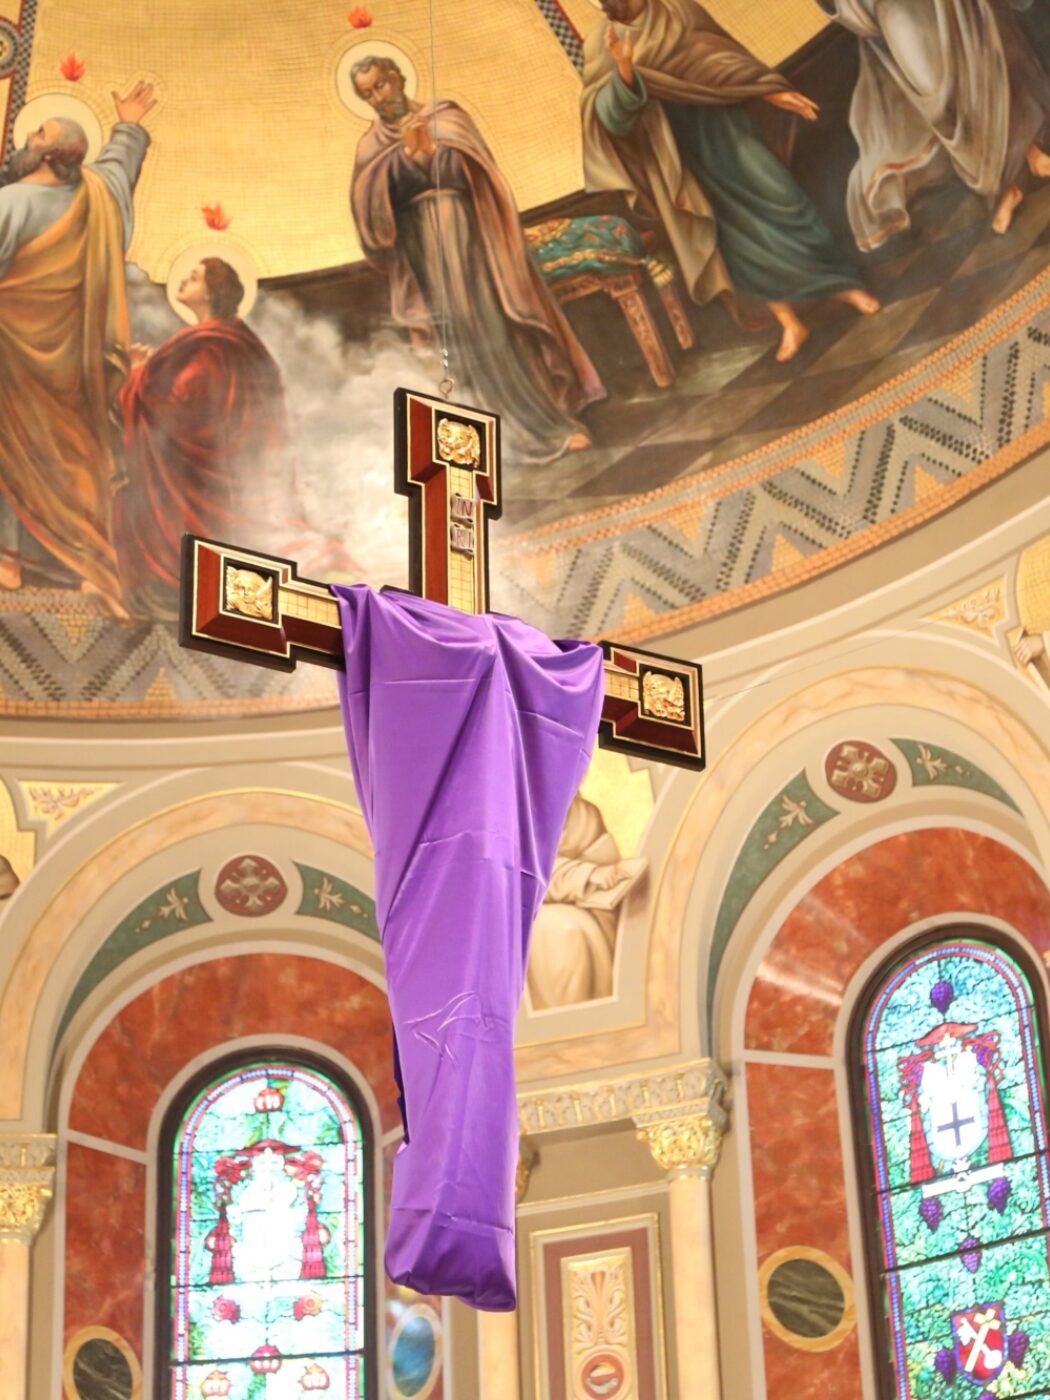 Why do we cover statues and images with a veil during Lent? - Saint John's Seminary